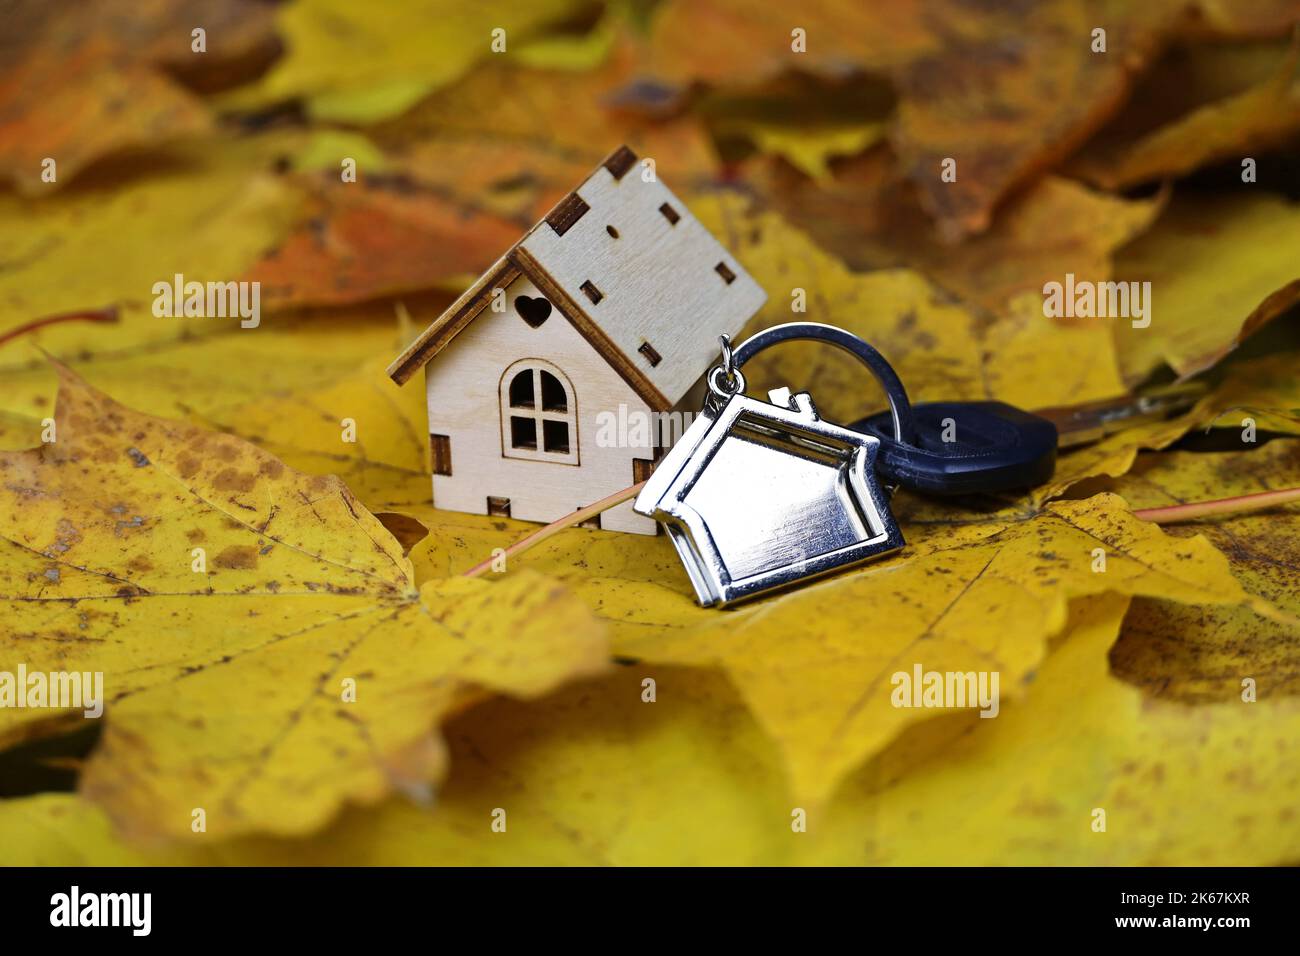 Wooden house model and key ring on maple leaves background. Concept of country cottage, housing search in autumn, real estate Stock Photo